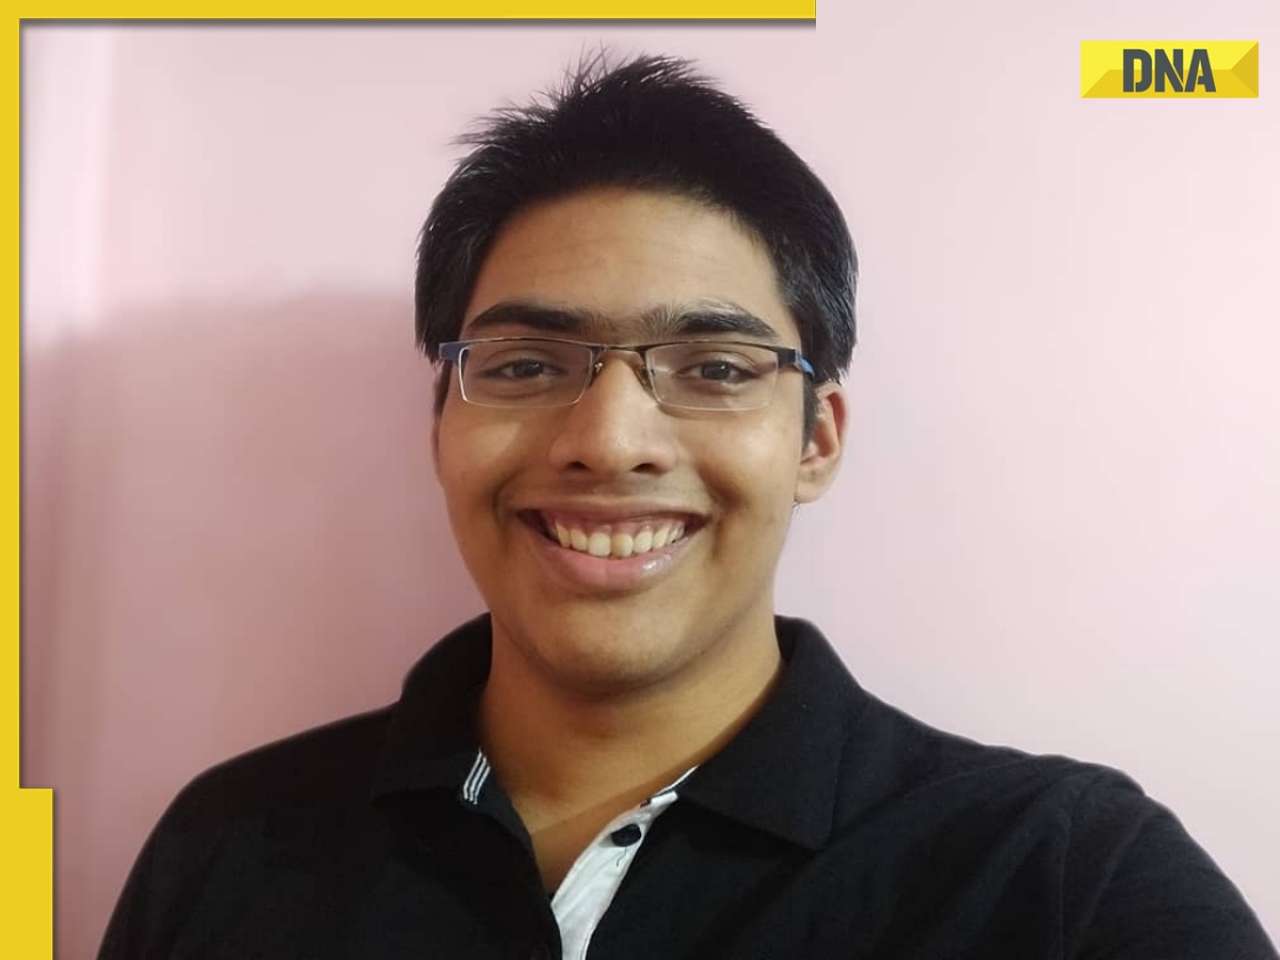 Meet IIT-JEE topper who passed JEE Advanced with AIR 1, decided to drop out of IIT due to…